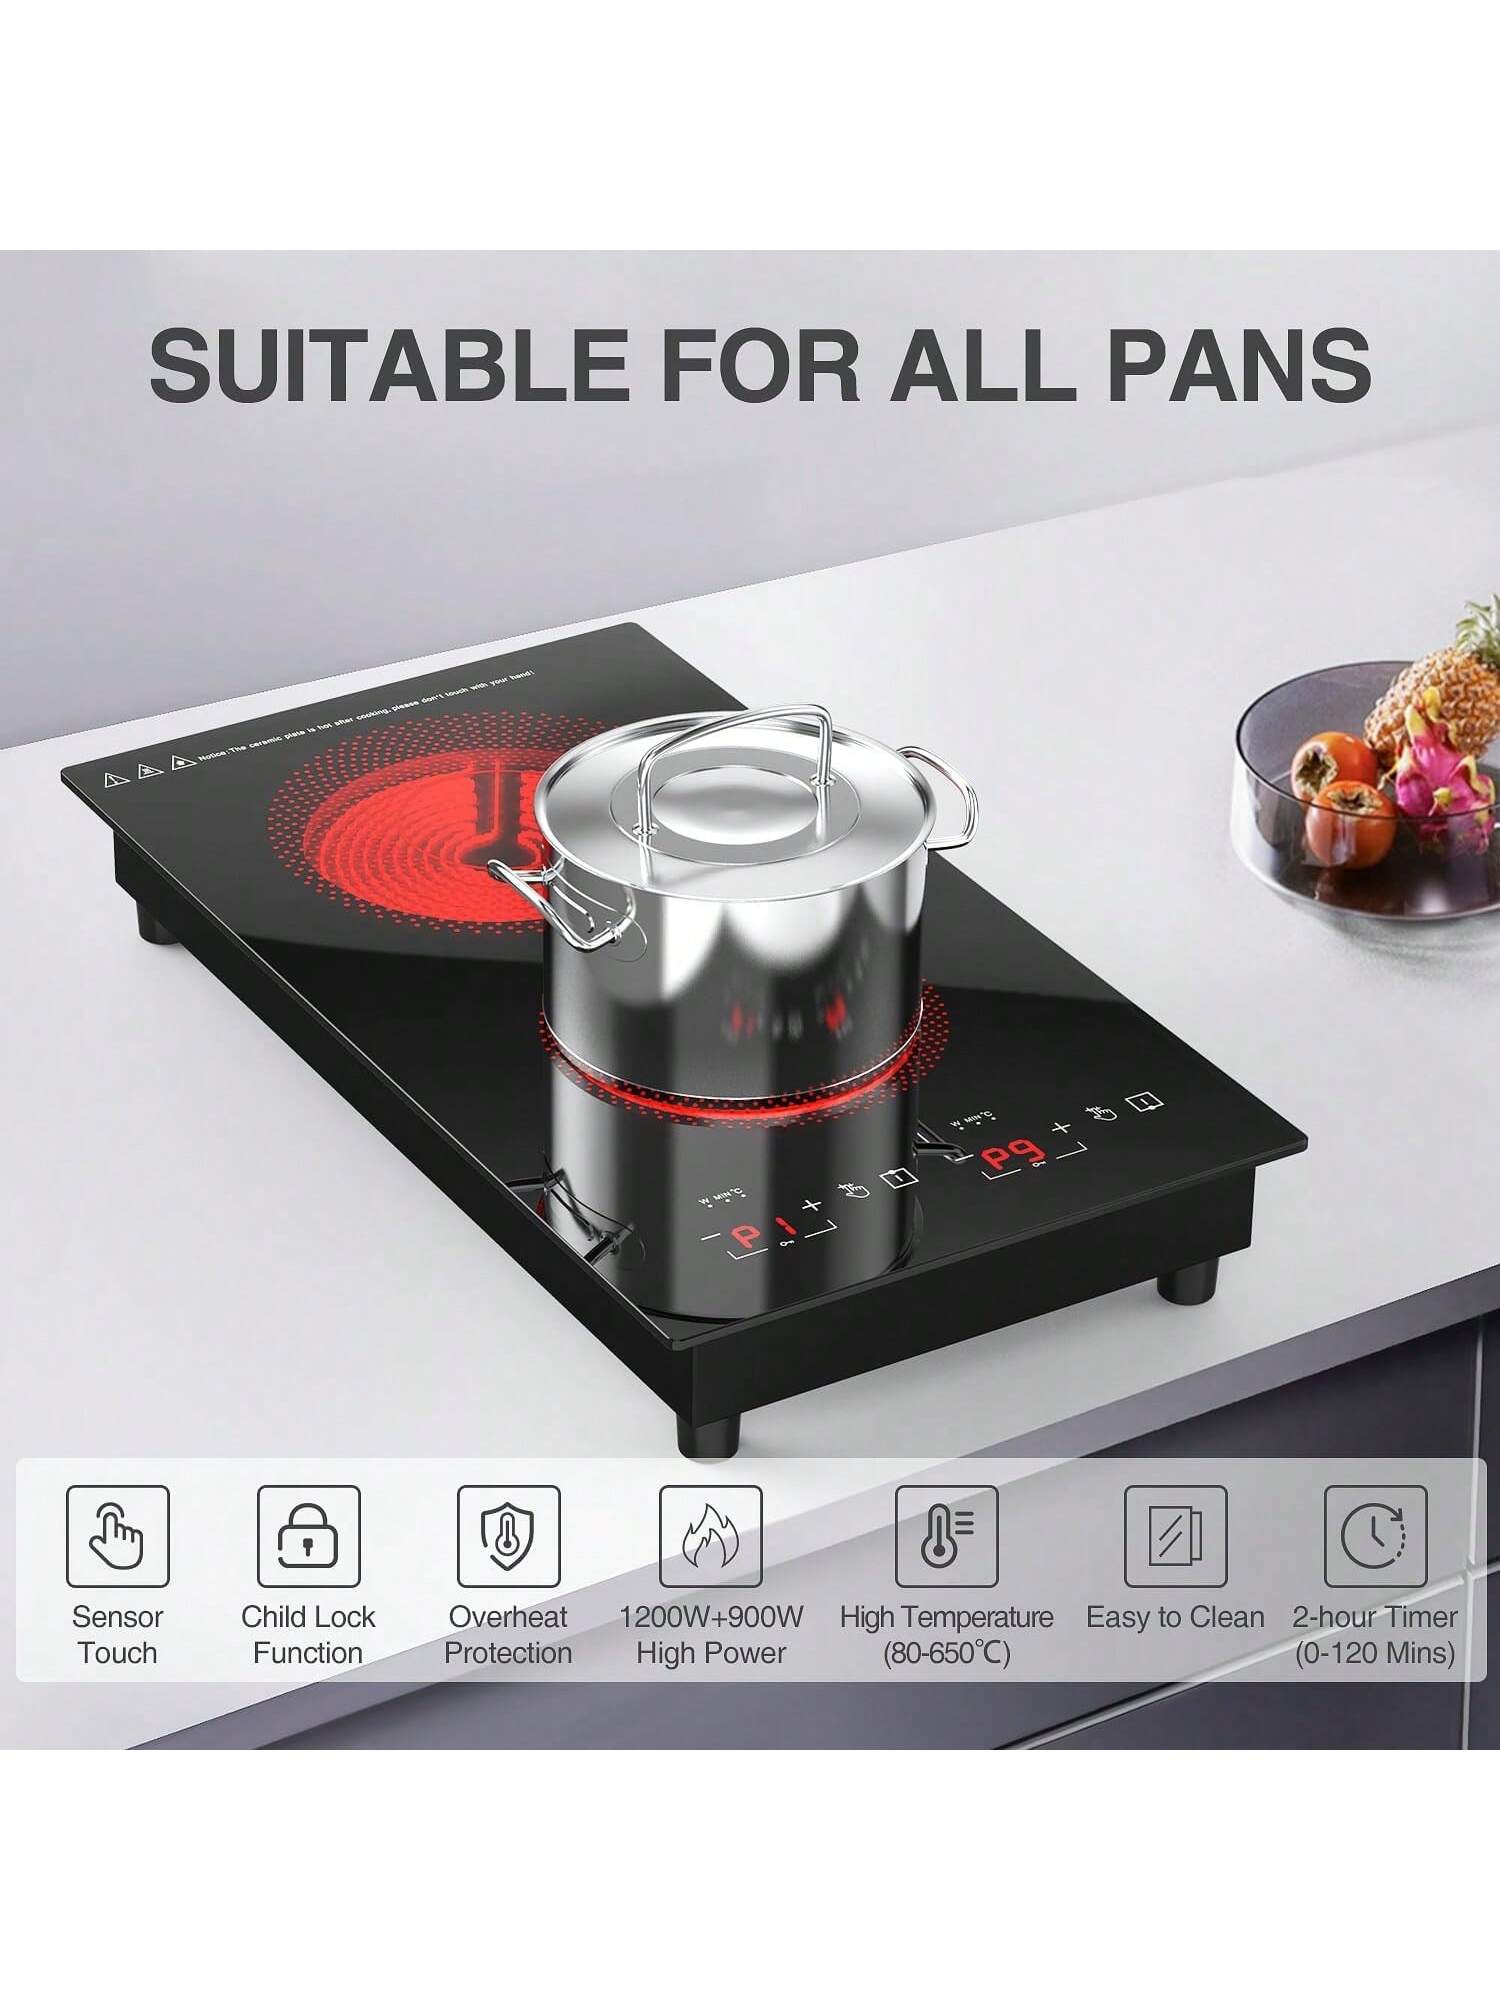 VBGK Electric Cooktop,110V Electric Stove Top,Single Burner Electric  Cooktop LED Touch Control,9 Power Levels, Kids Lock &Timer,Overheat